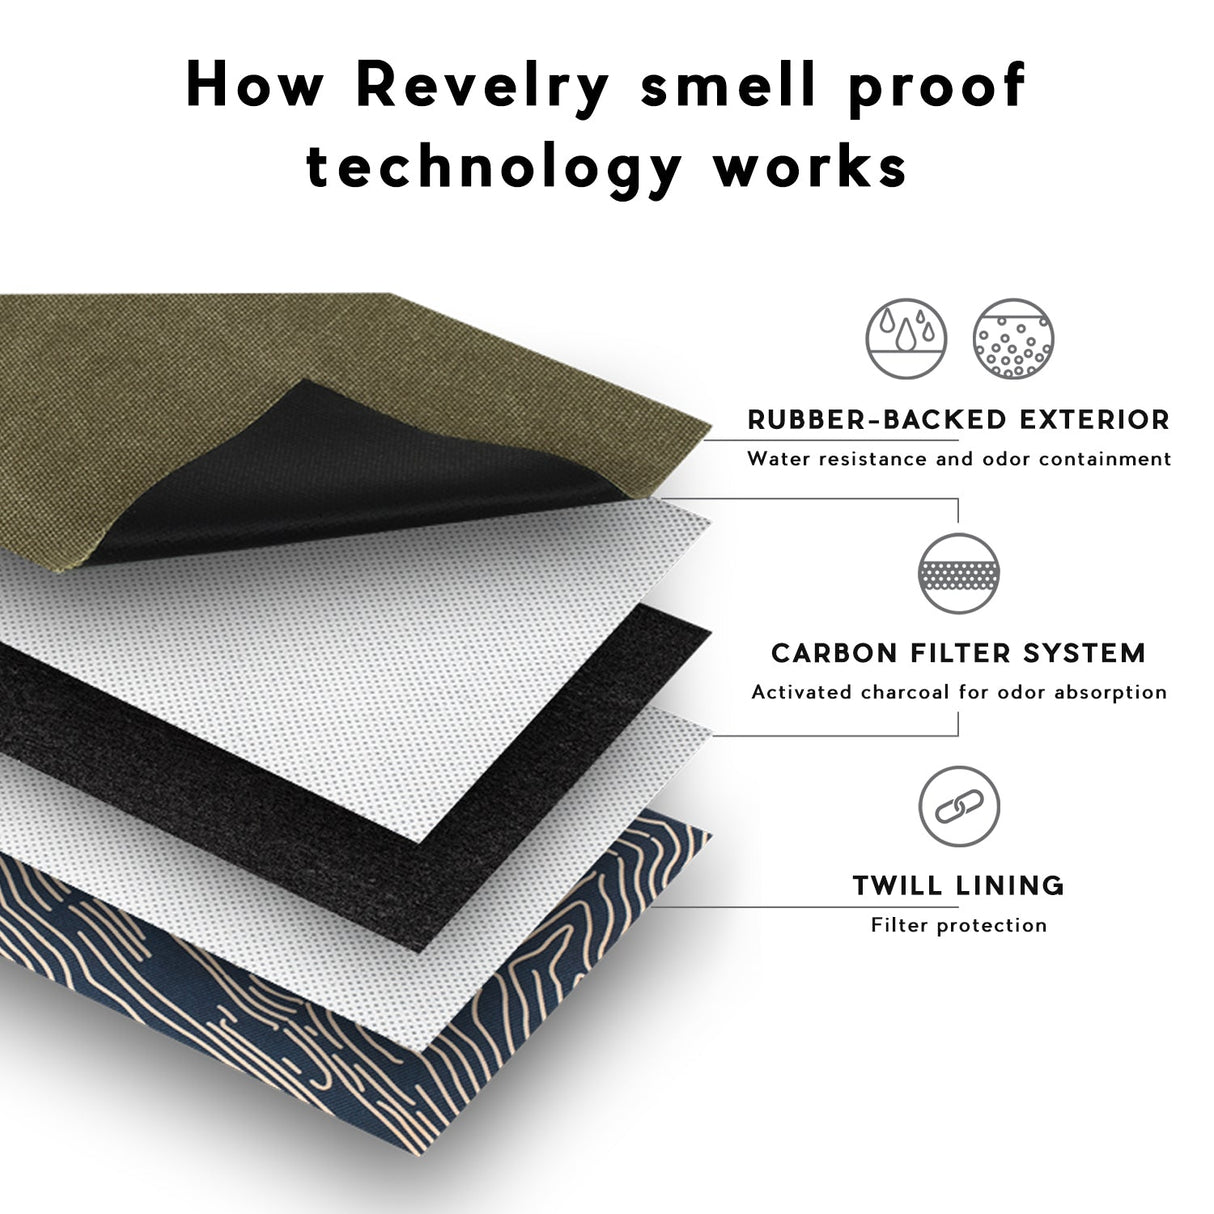 Revelry Supply's The Drifter backpack materials showcasing smell proof technology layers